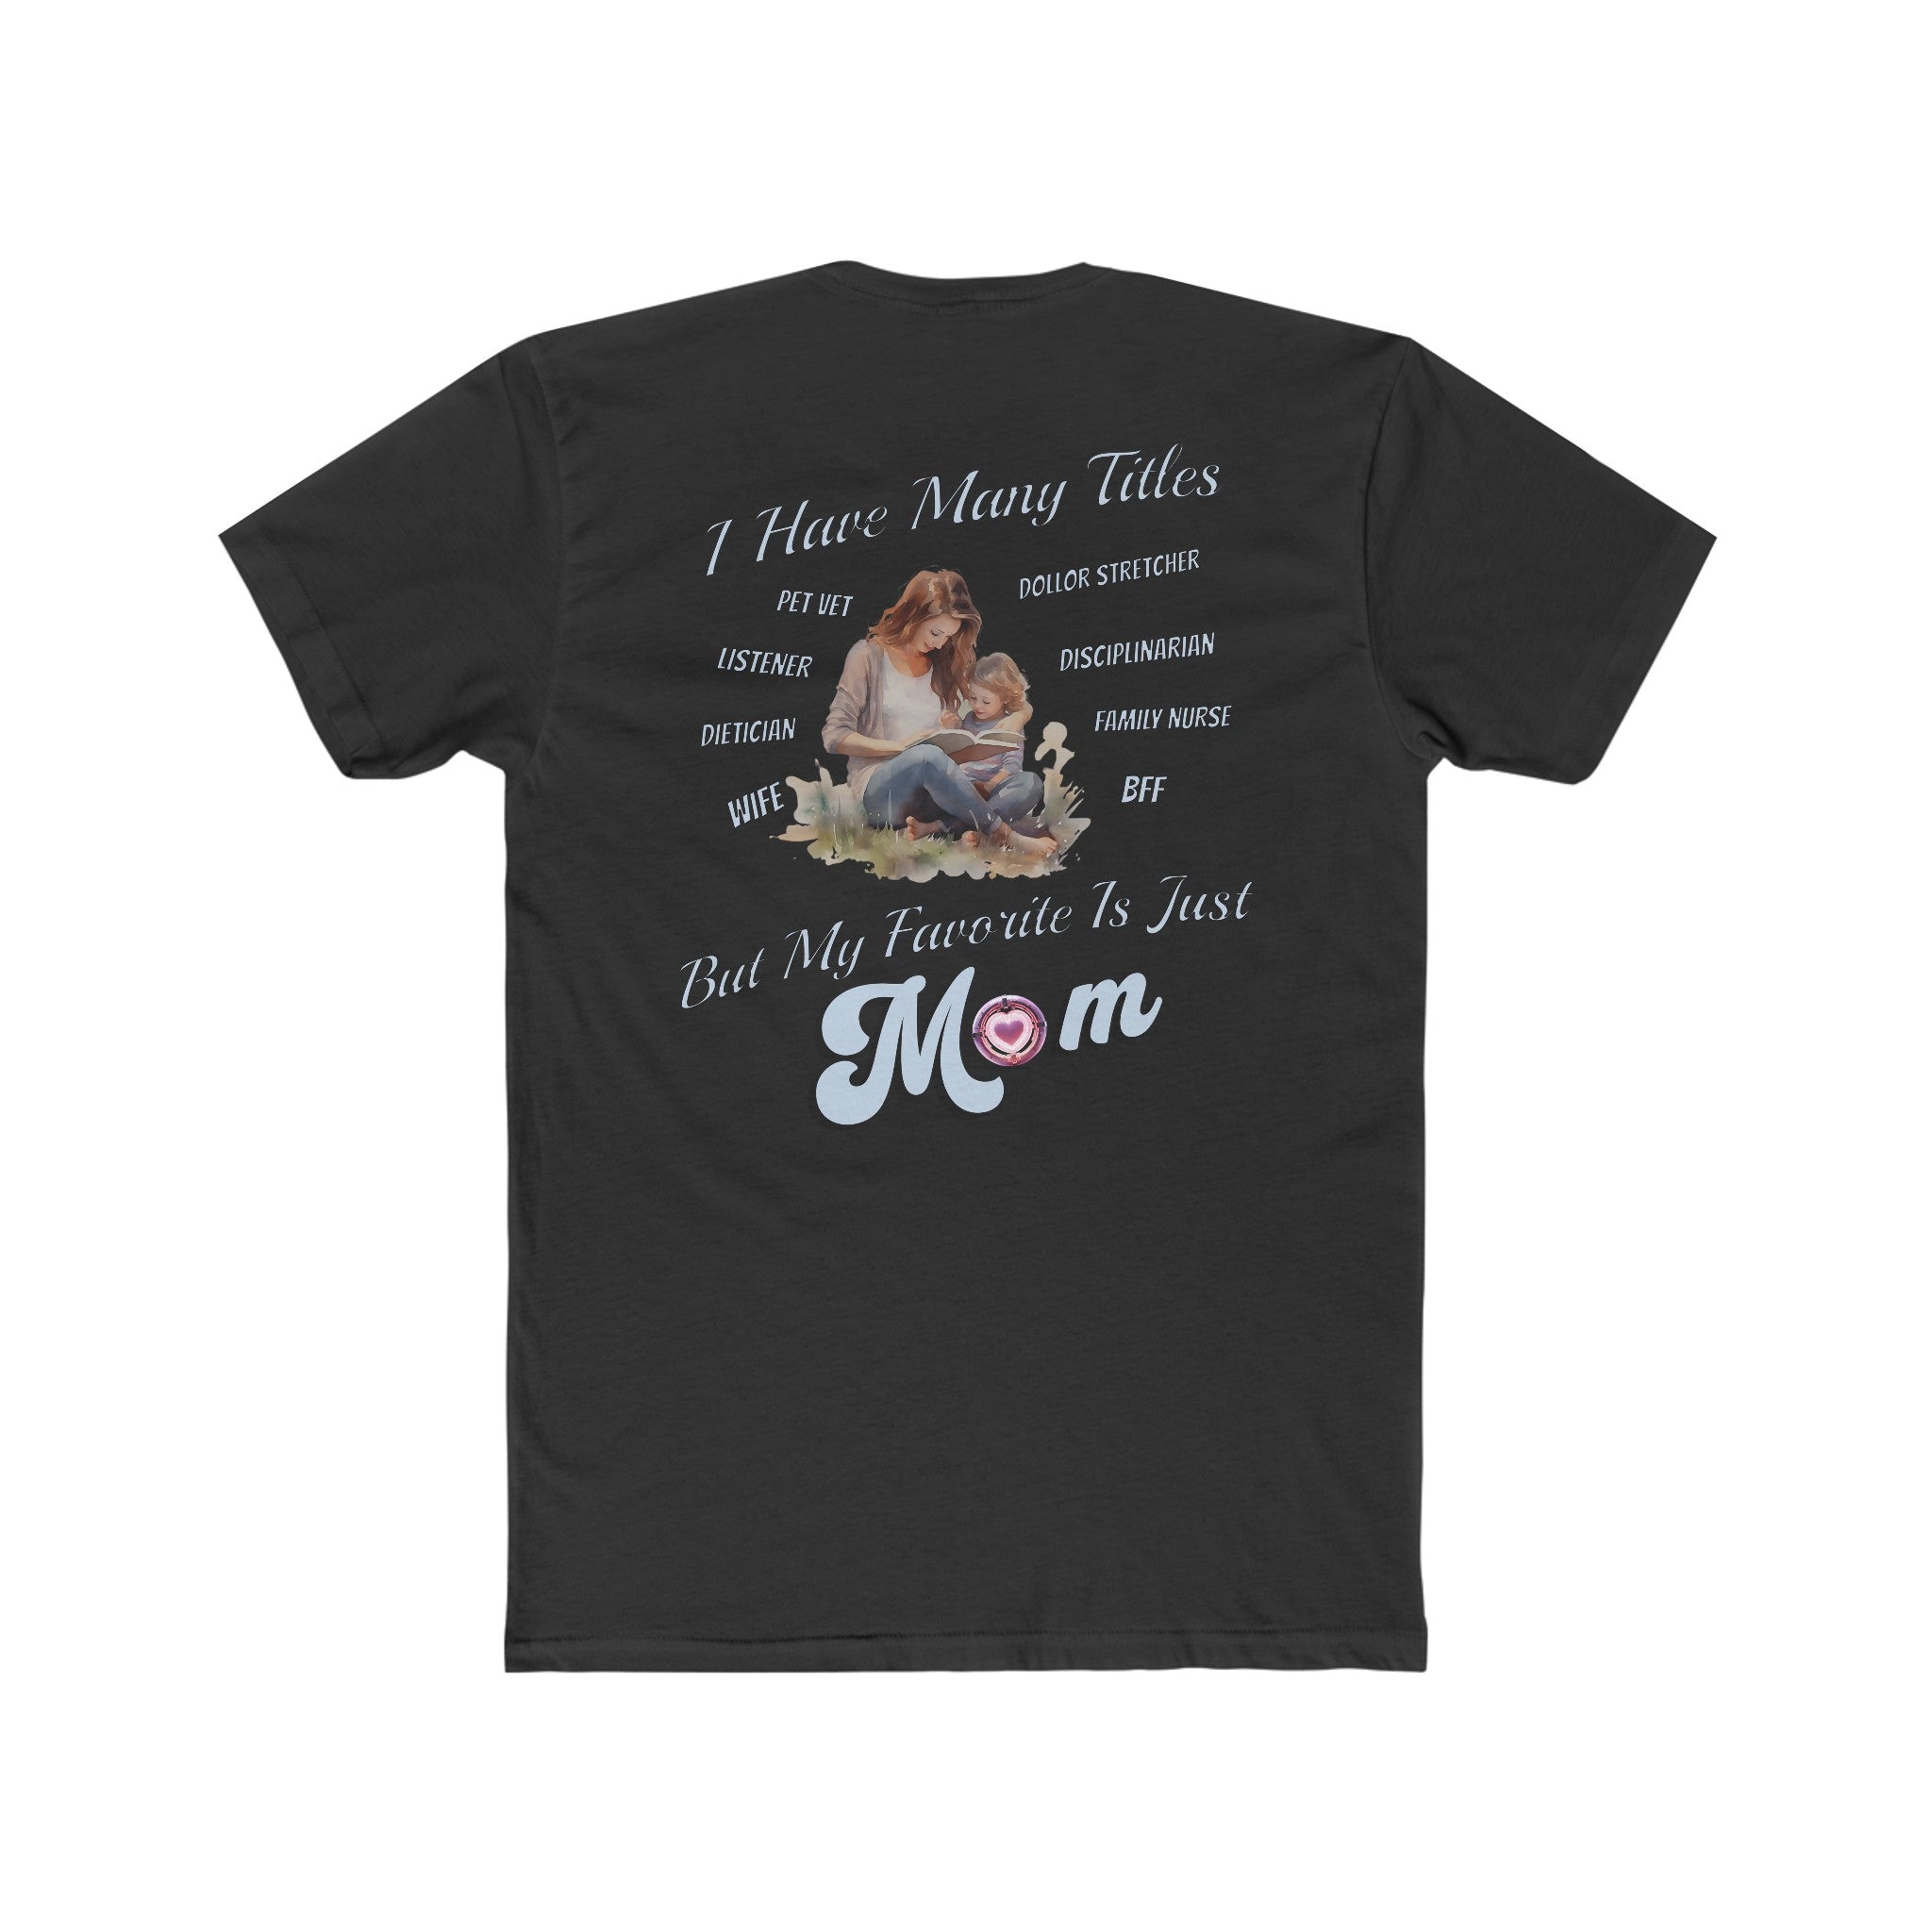 Mom has many titles. Let's celebrate her on Mother's Day with this special shirt.